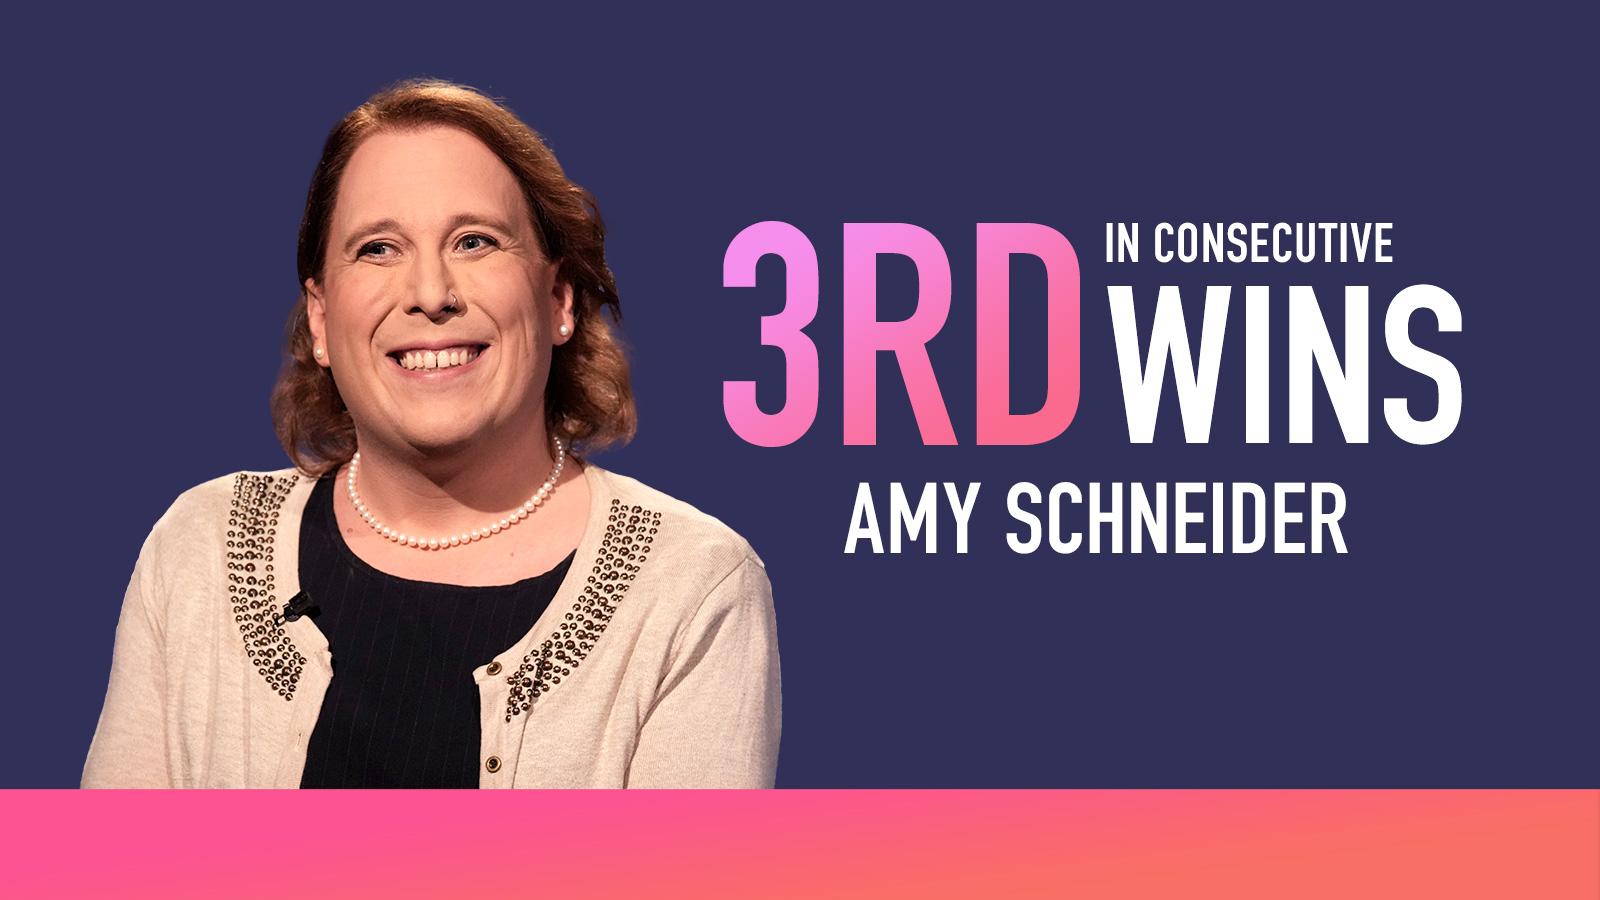 This image says 3rd in consecutive wins Amy Schneider 